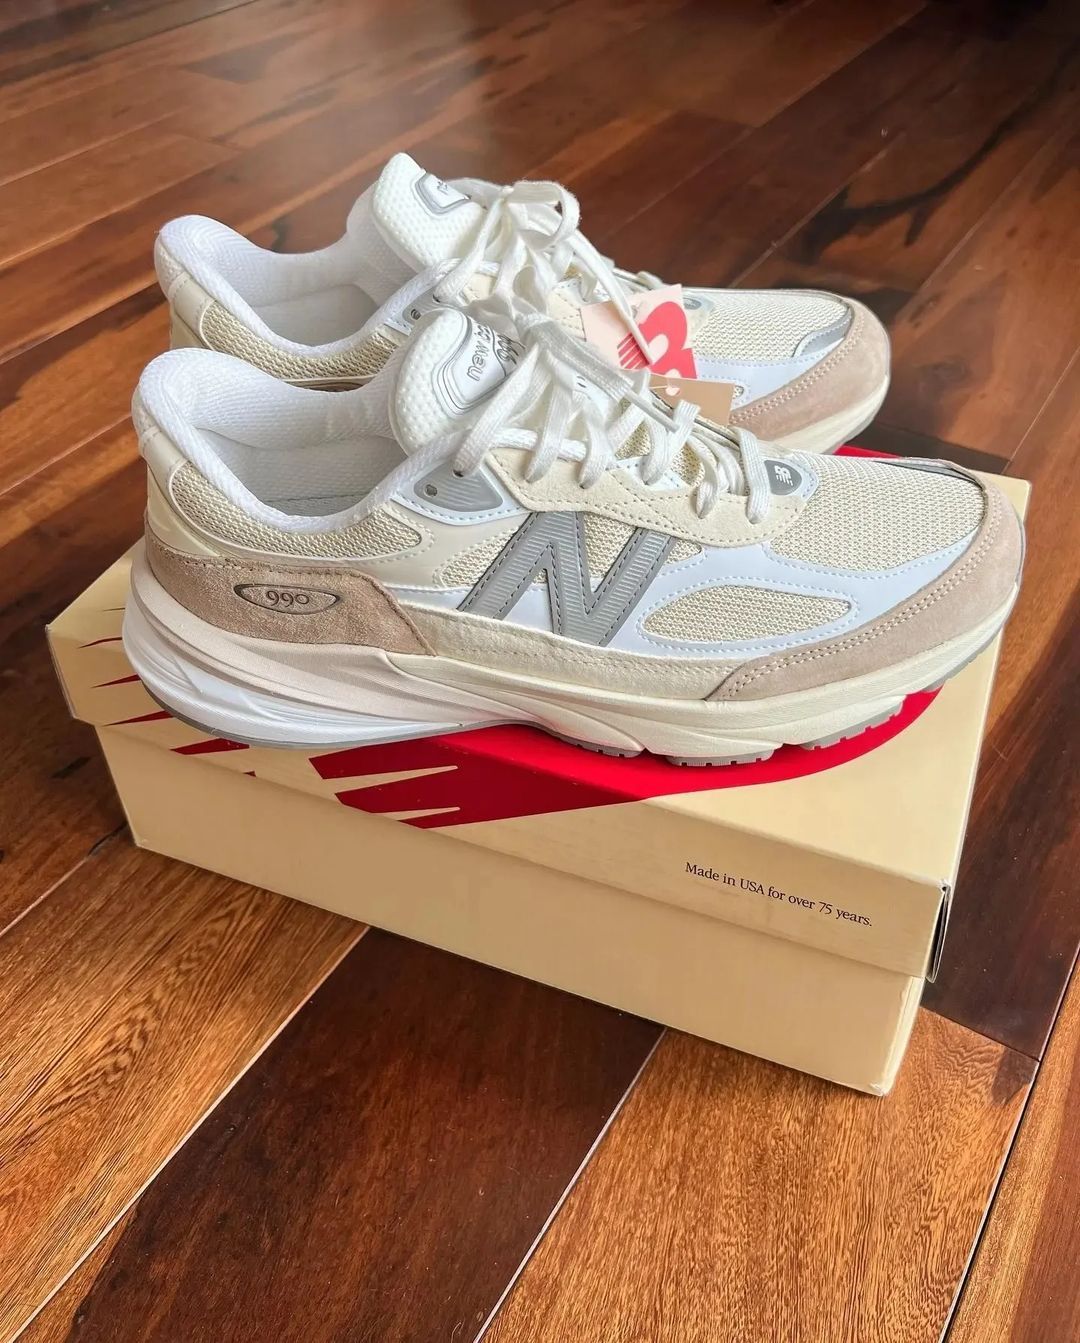 The Next New Balance 990v6 Curated in Cream and White | House of